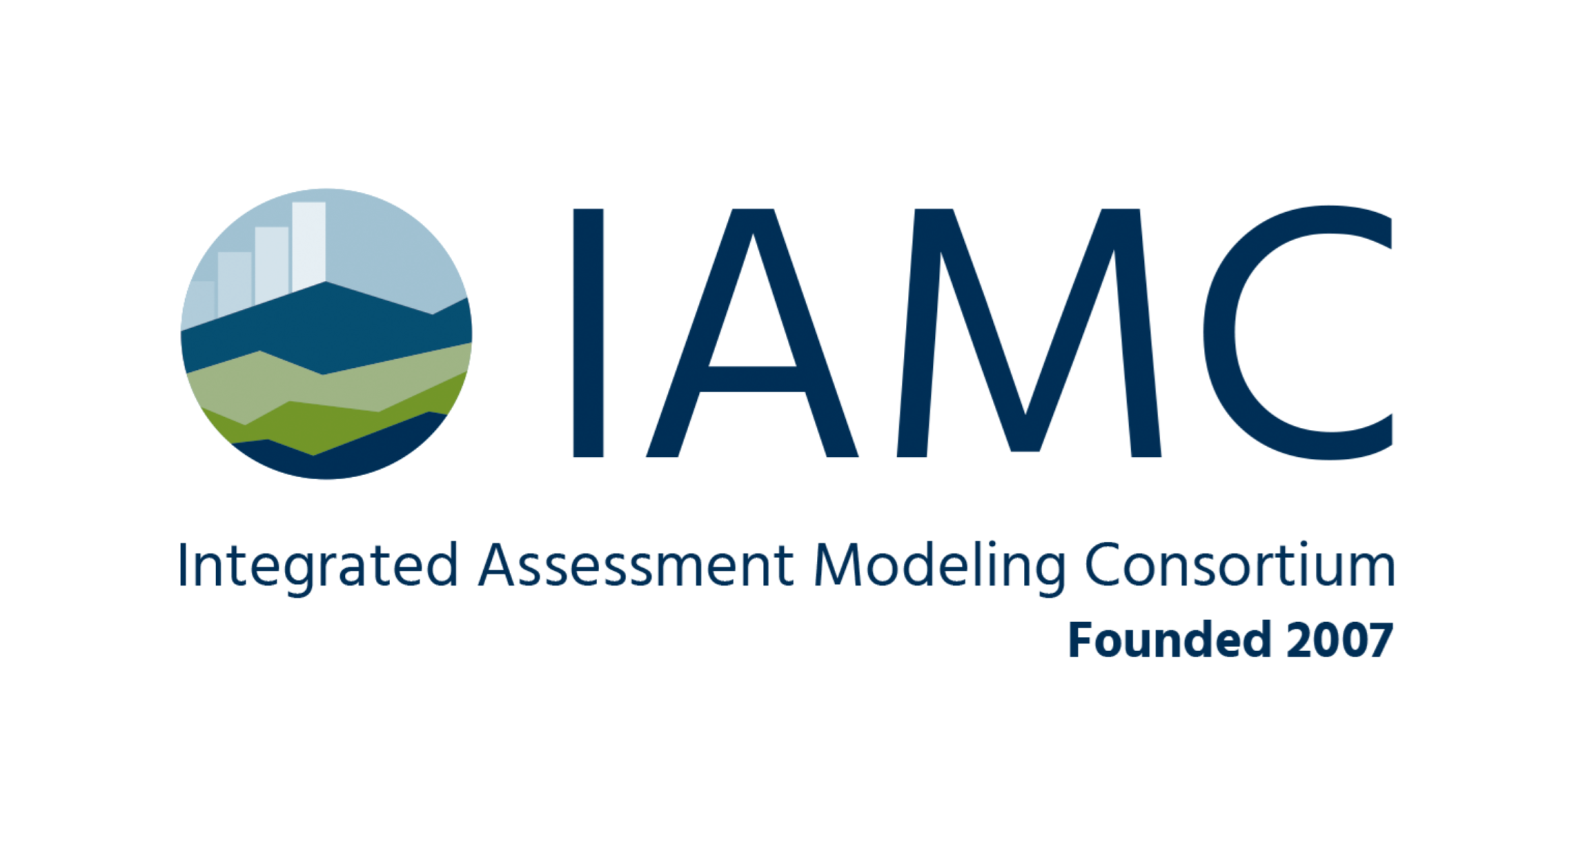 A new website and logo for the Integrated Assessment Consortium